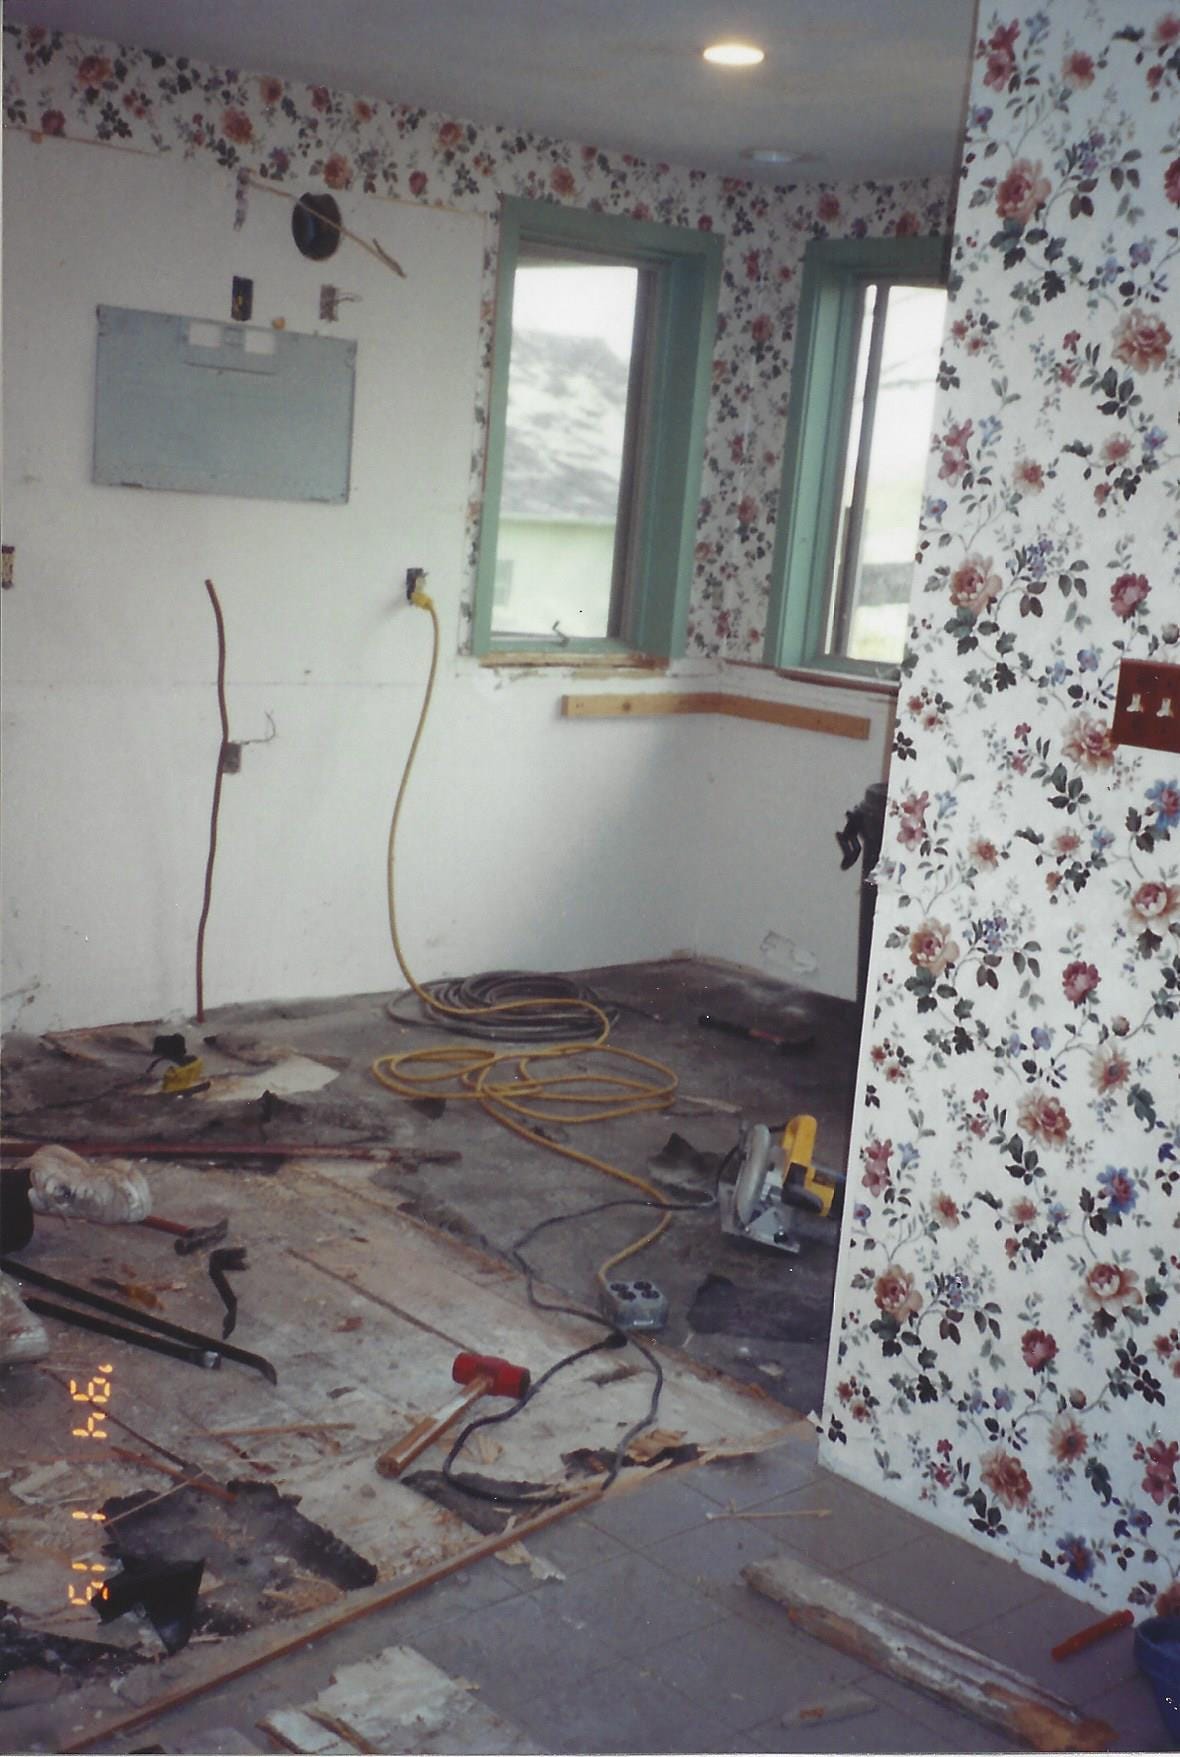 A messy construction scene in a kitchen being remodeled